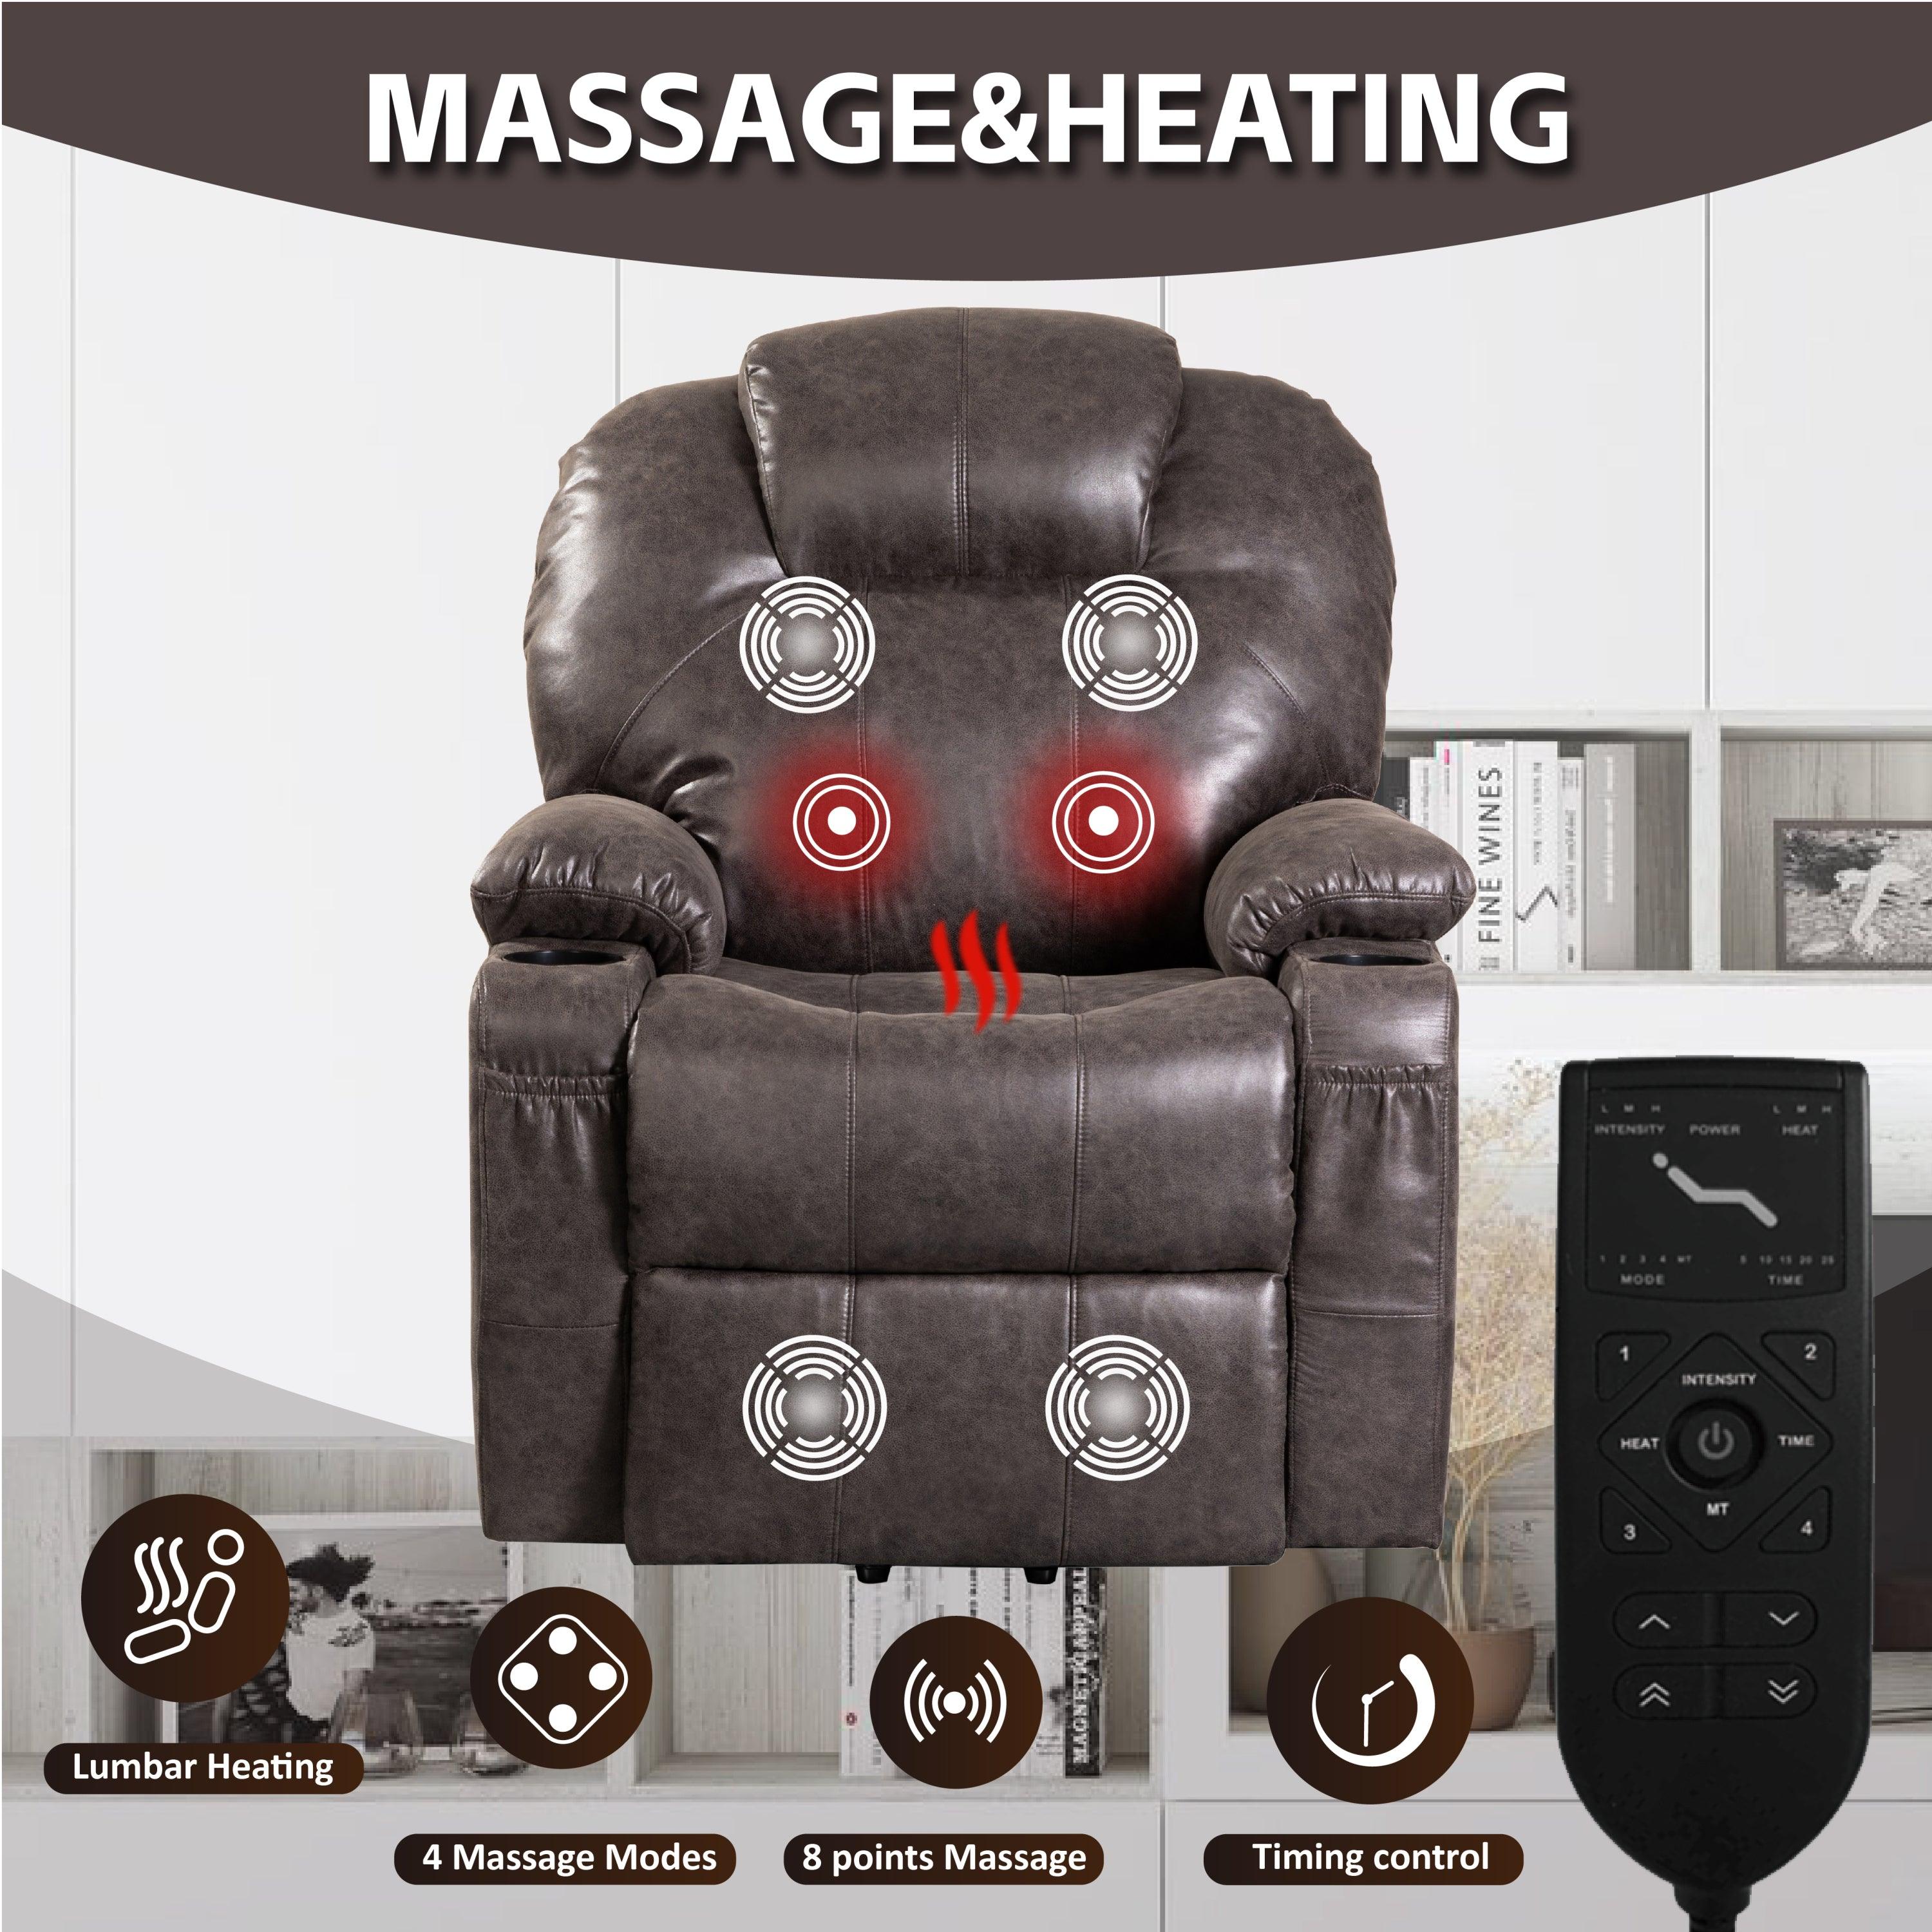 Lift Chair Recliner with Massage and Heat, Brown